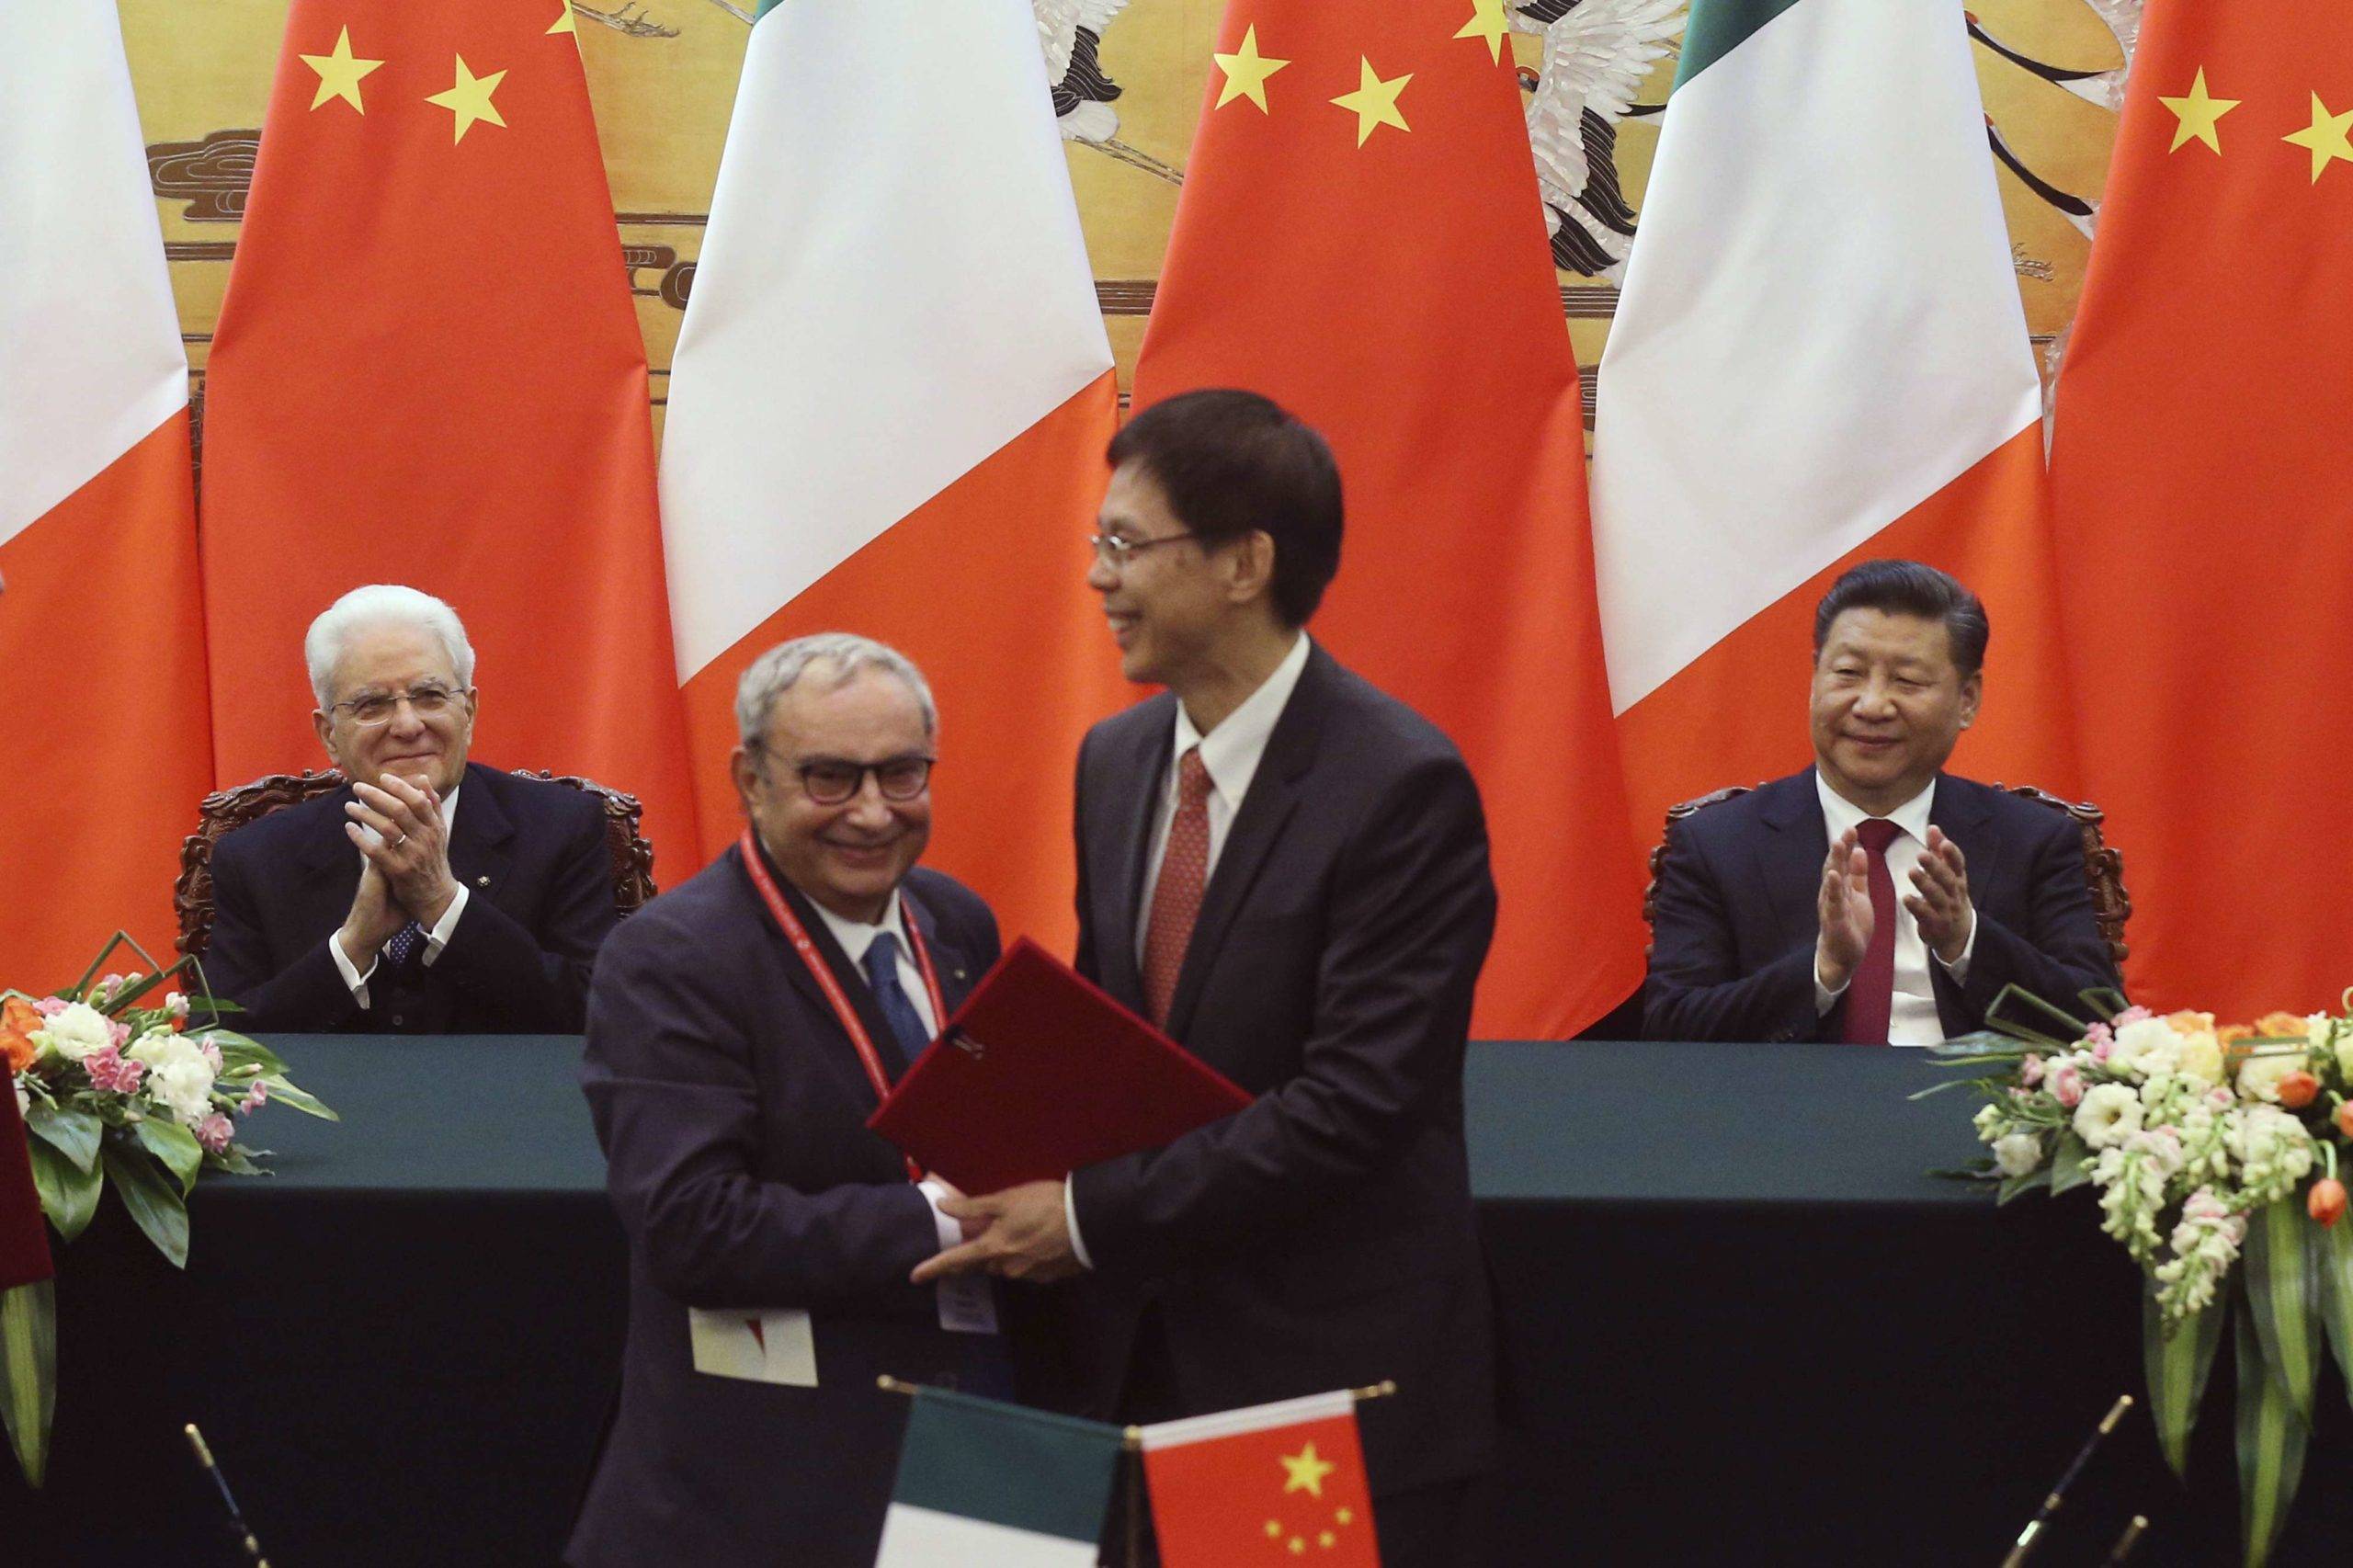 Italian President Sergio Mattarella, left, and his Chinese counterpart Xi Jinping, right, clap as officials from the both countries shake hands after exchange documents signed an agreement at the Great Hall of the People in Beijing Wednesday, Feb. 22, 2017. (Wu Hong/Pool Photo via AP)/TKTT311/17053410157064/POOL PHOTO/1702221246